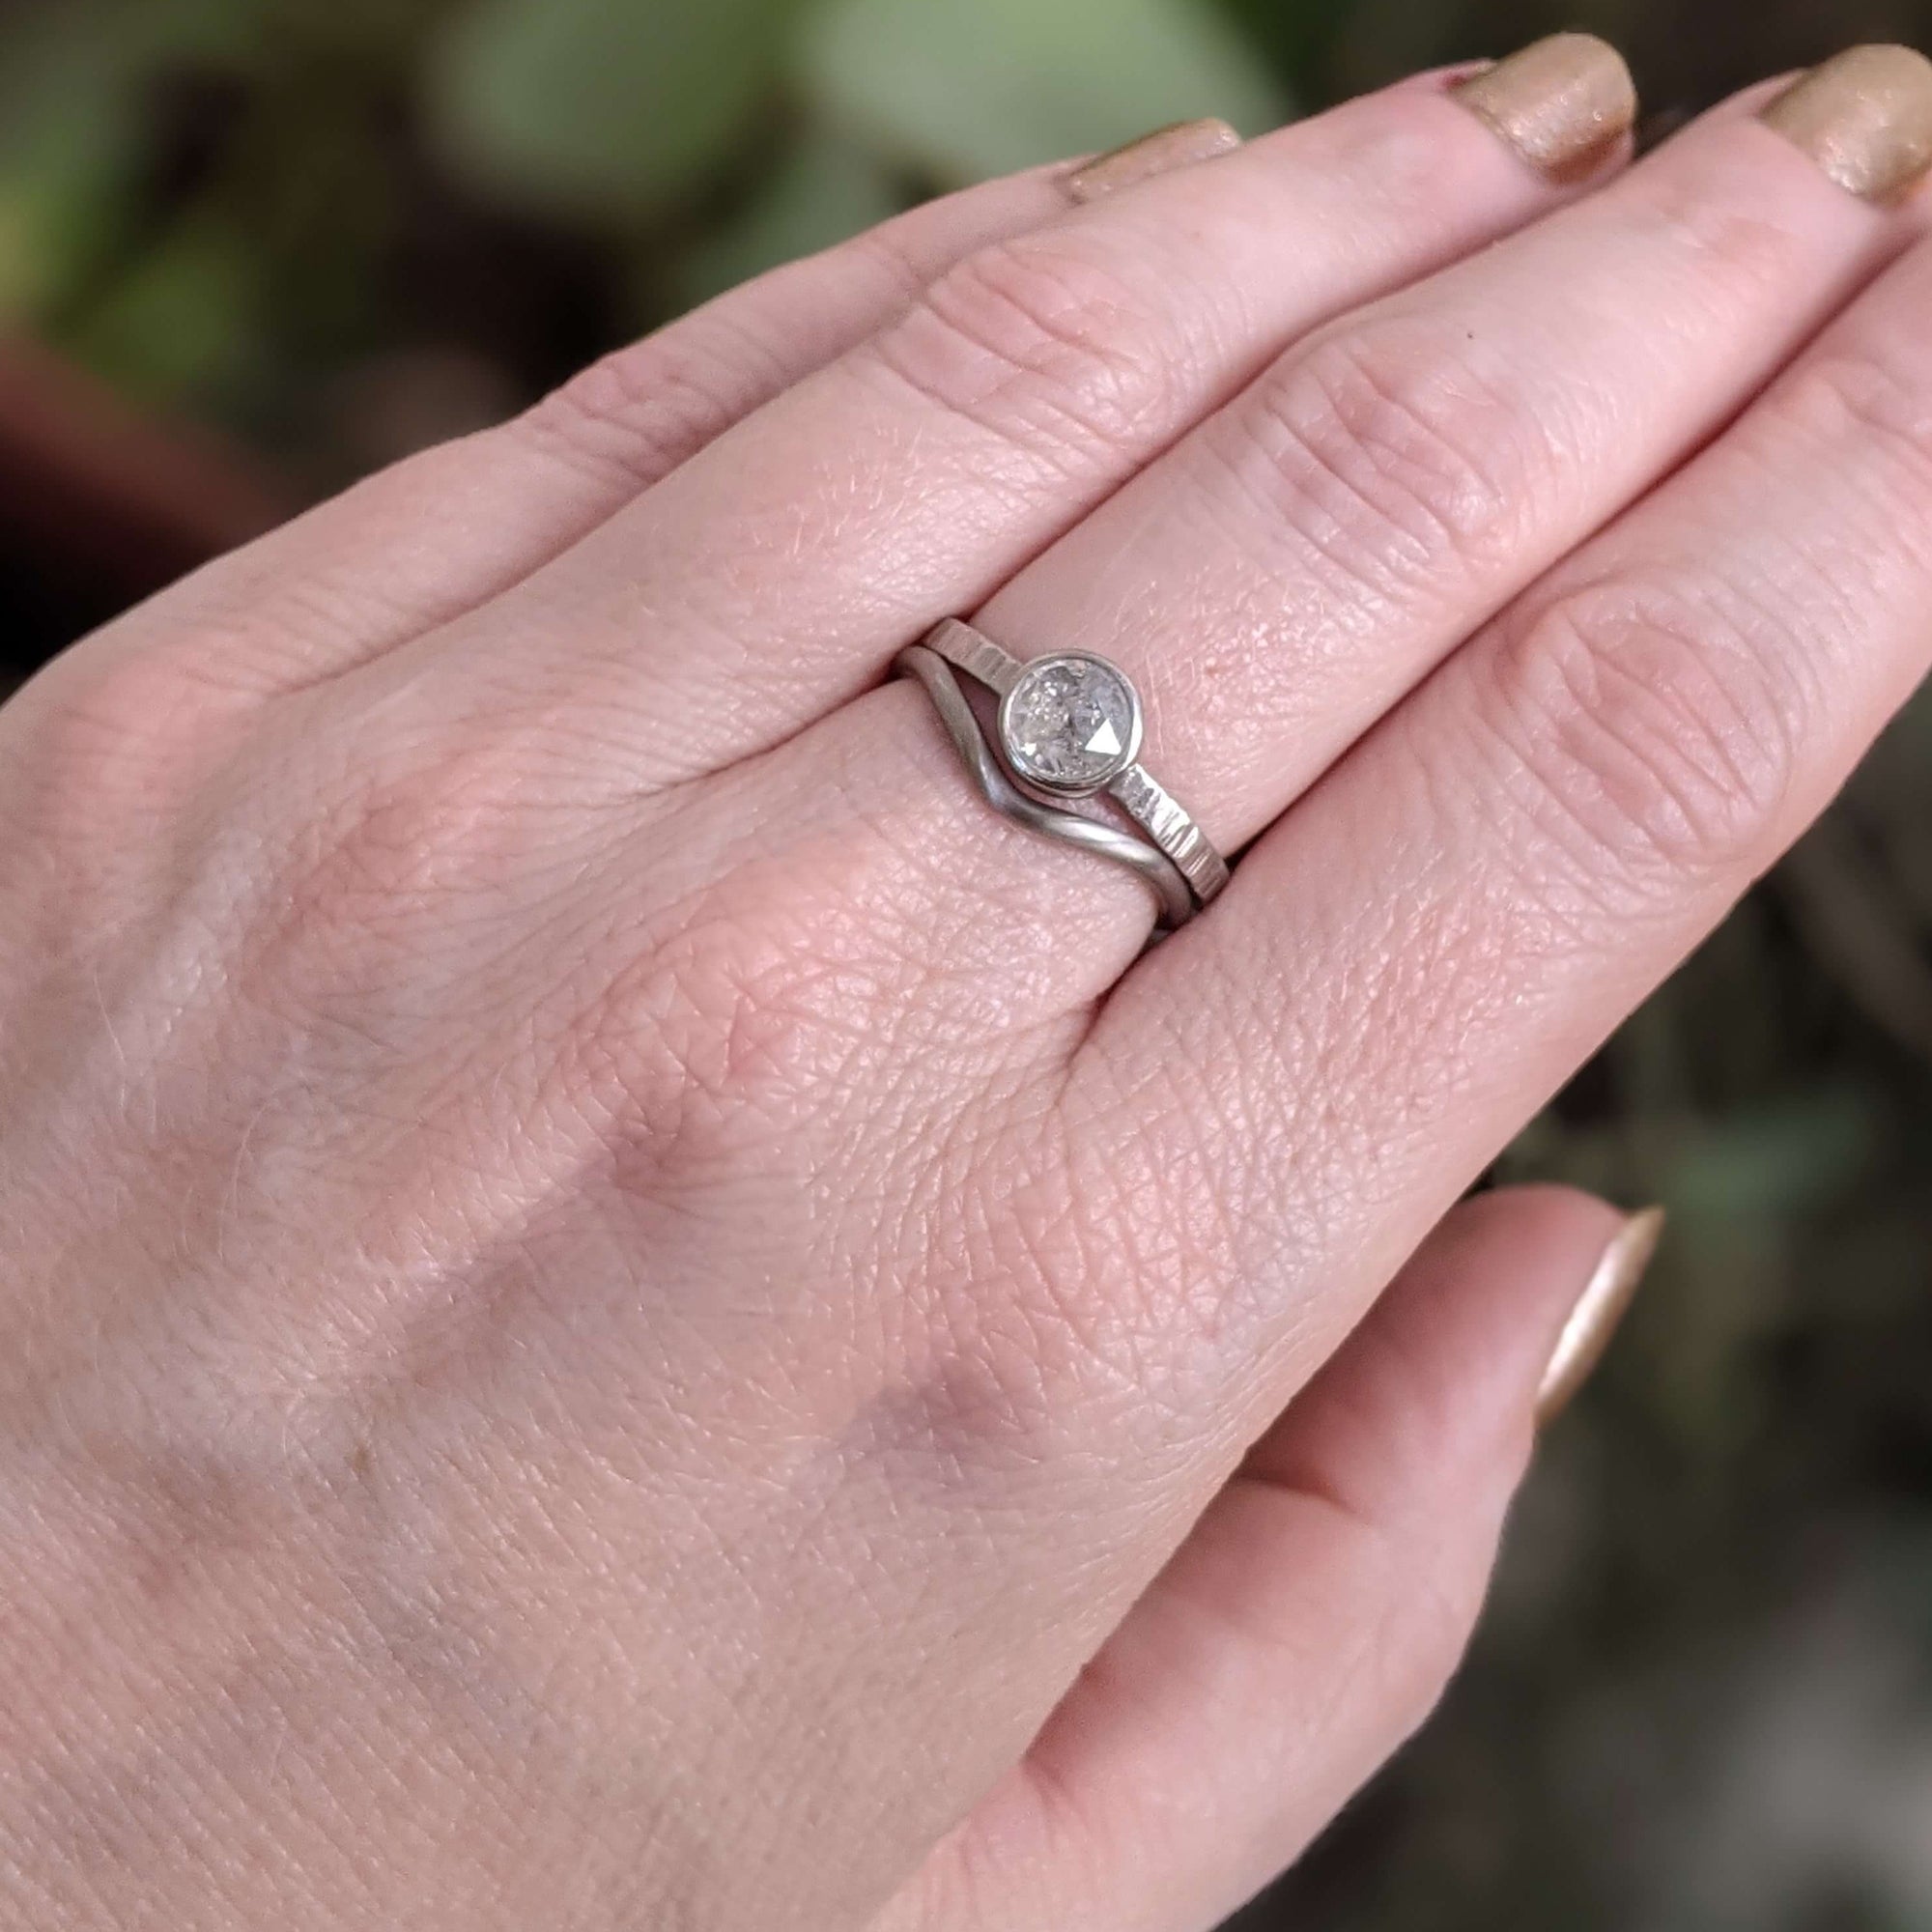 Rose cut ice diamond and palladium engagement ring. Handmade by EC Design Jewelry in Minneapolis, MN using recycled metal and conflict-free stone.